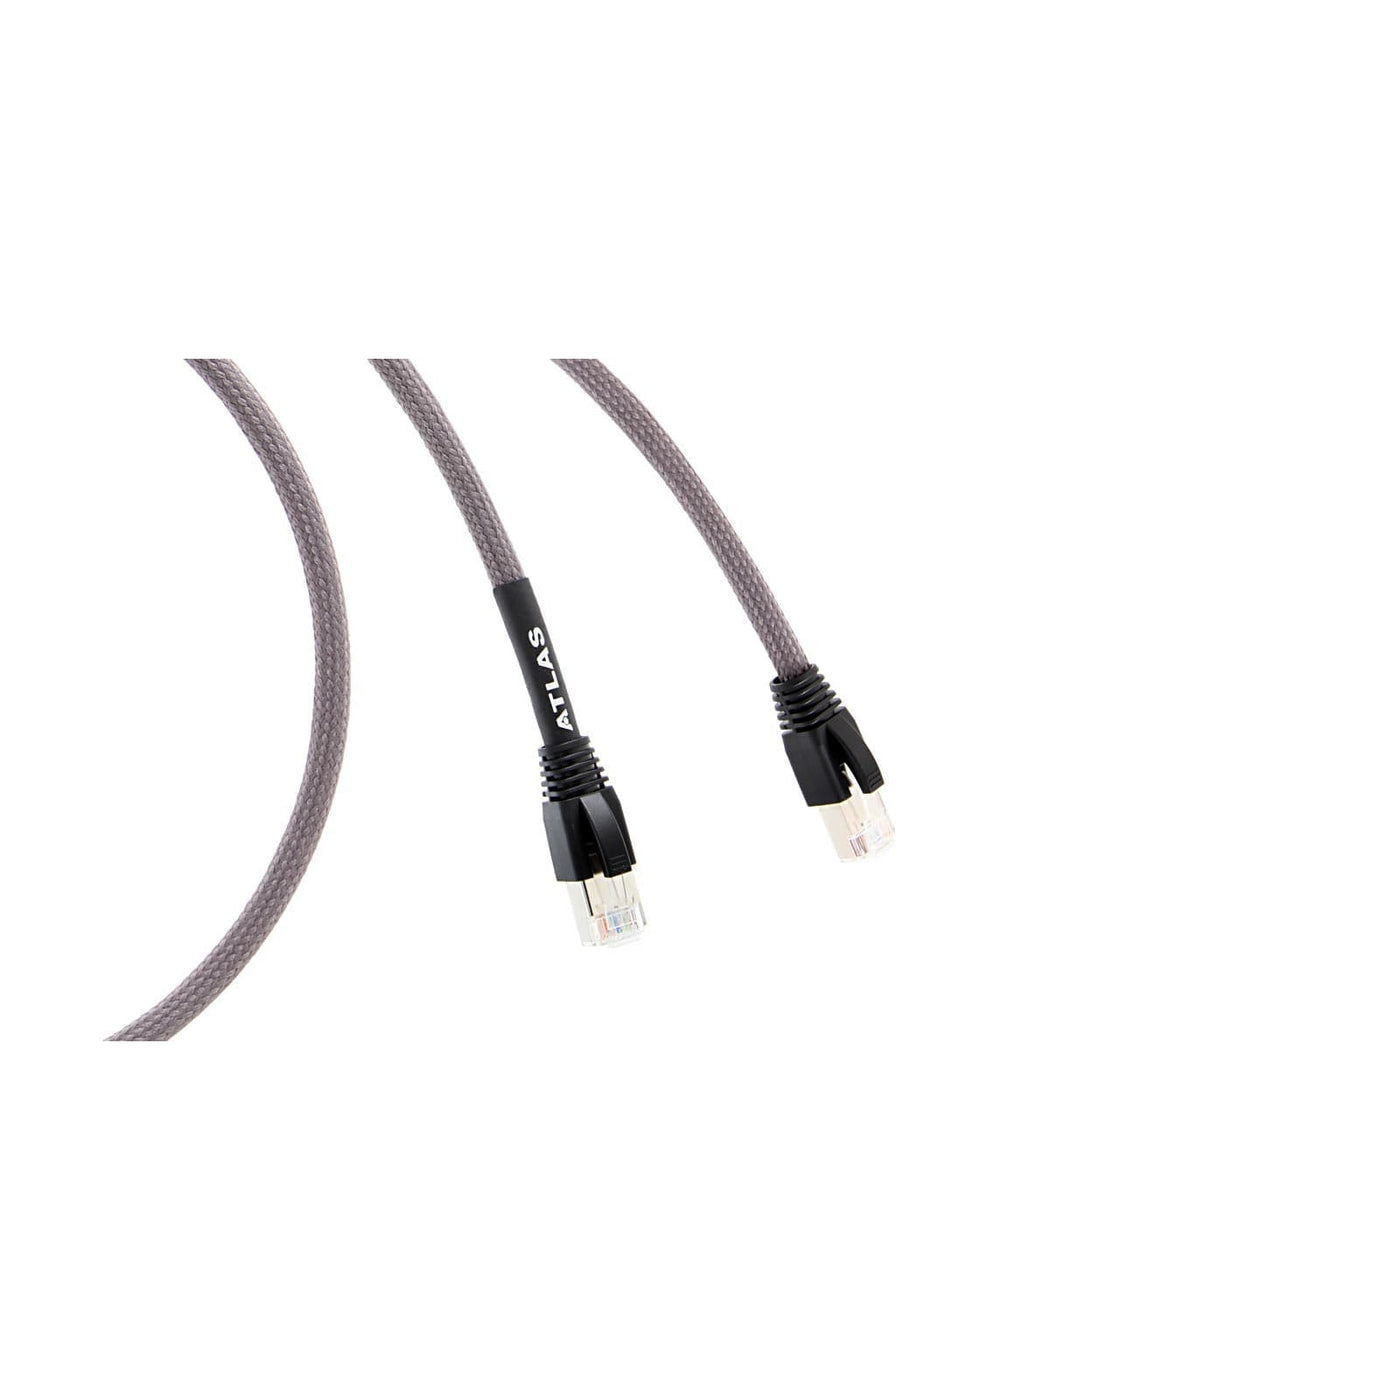 Atlas Equator Streaming Ethernet Digital Cable at Audio Influence